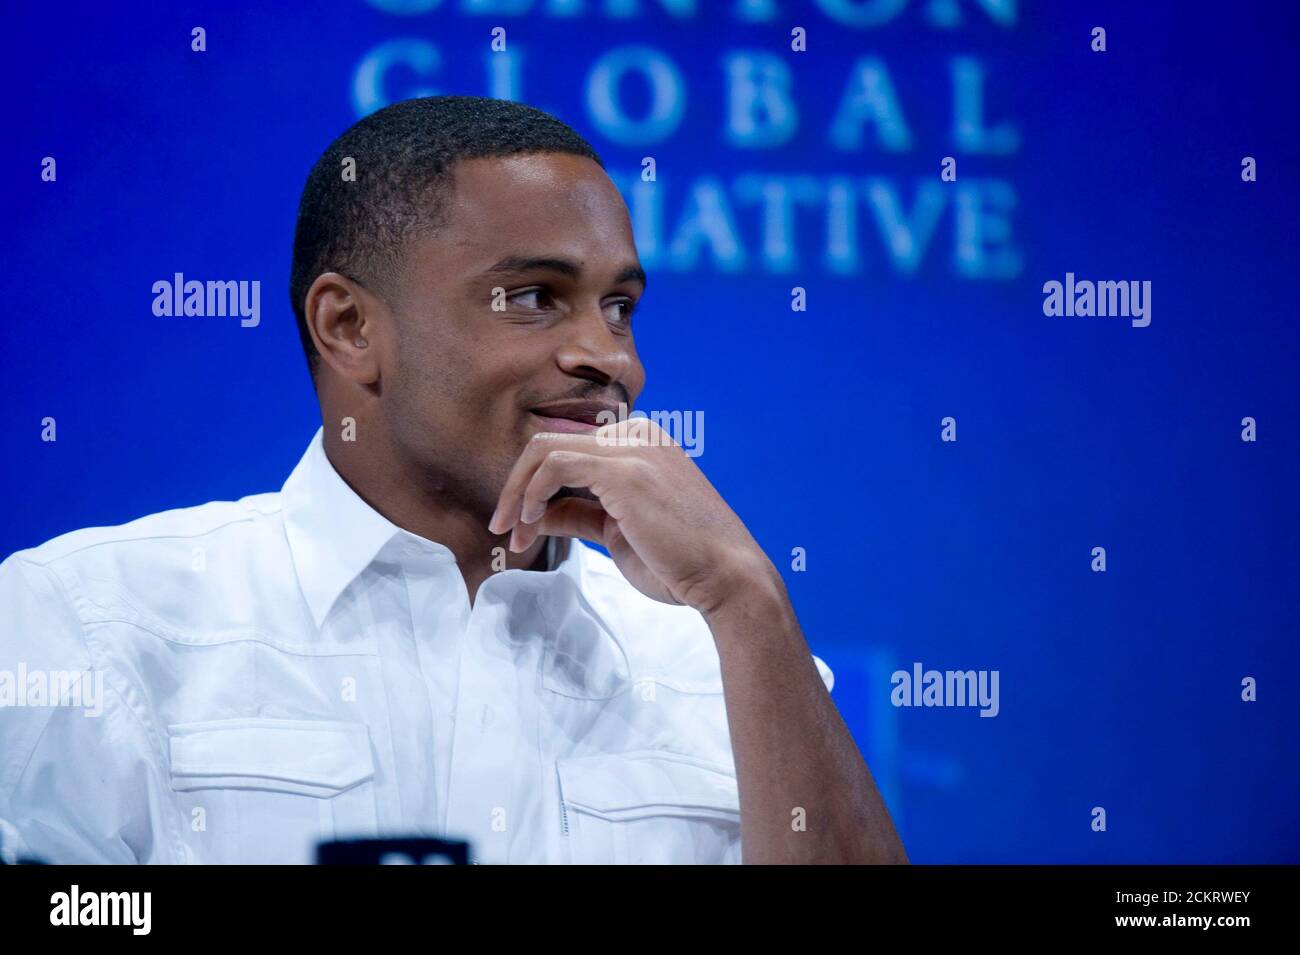 Austin, TX February 14, 2009: Oakland Raiders cornerback Nnamdi Asomugha listens on a panel at the second-annual Clinton Global Initiative University, a conference bringing together students to take action on global challenges such as poverty, hunger, energy, climate change and global health. The program is patterned after Clinton Global Initiative Foundation formed by President Bill Clinton. ©Bob Daemmrich Stock Photo